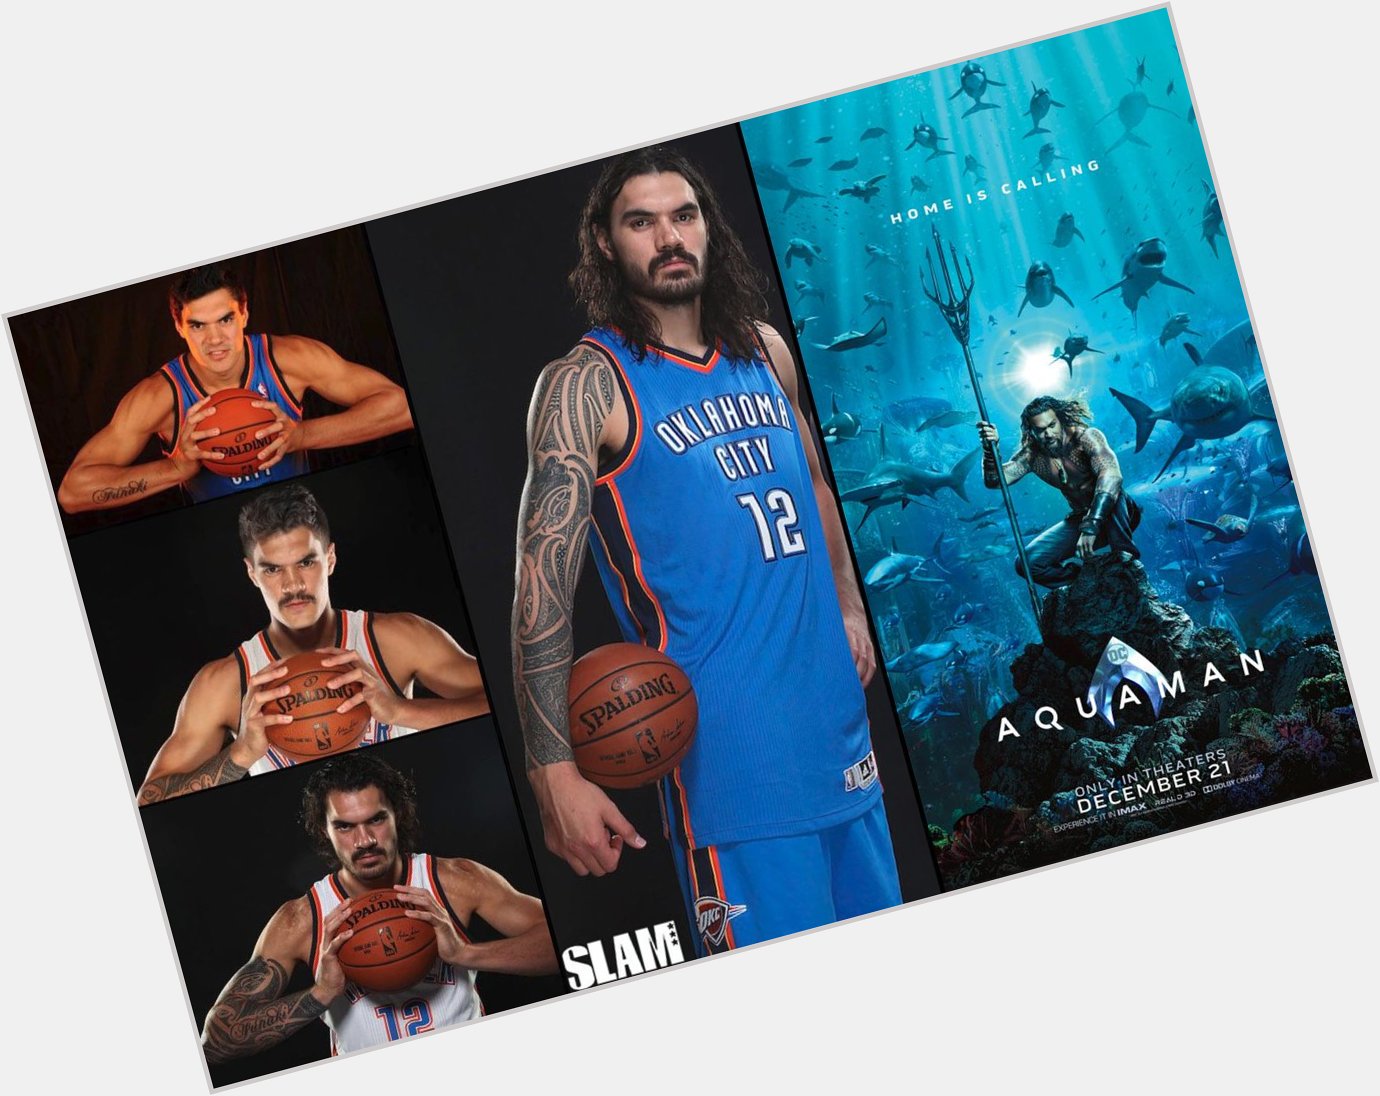 My Boy!!!      Happy 25th birthday to Steven Adams.
His biographical film comes out December 21st! 